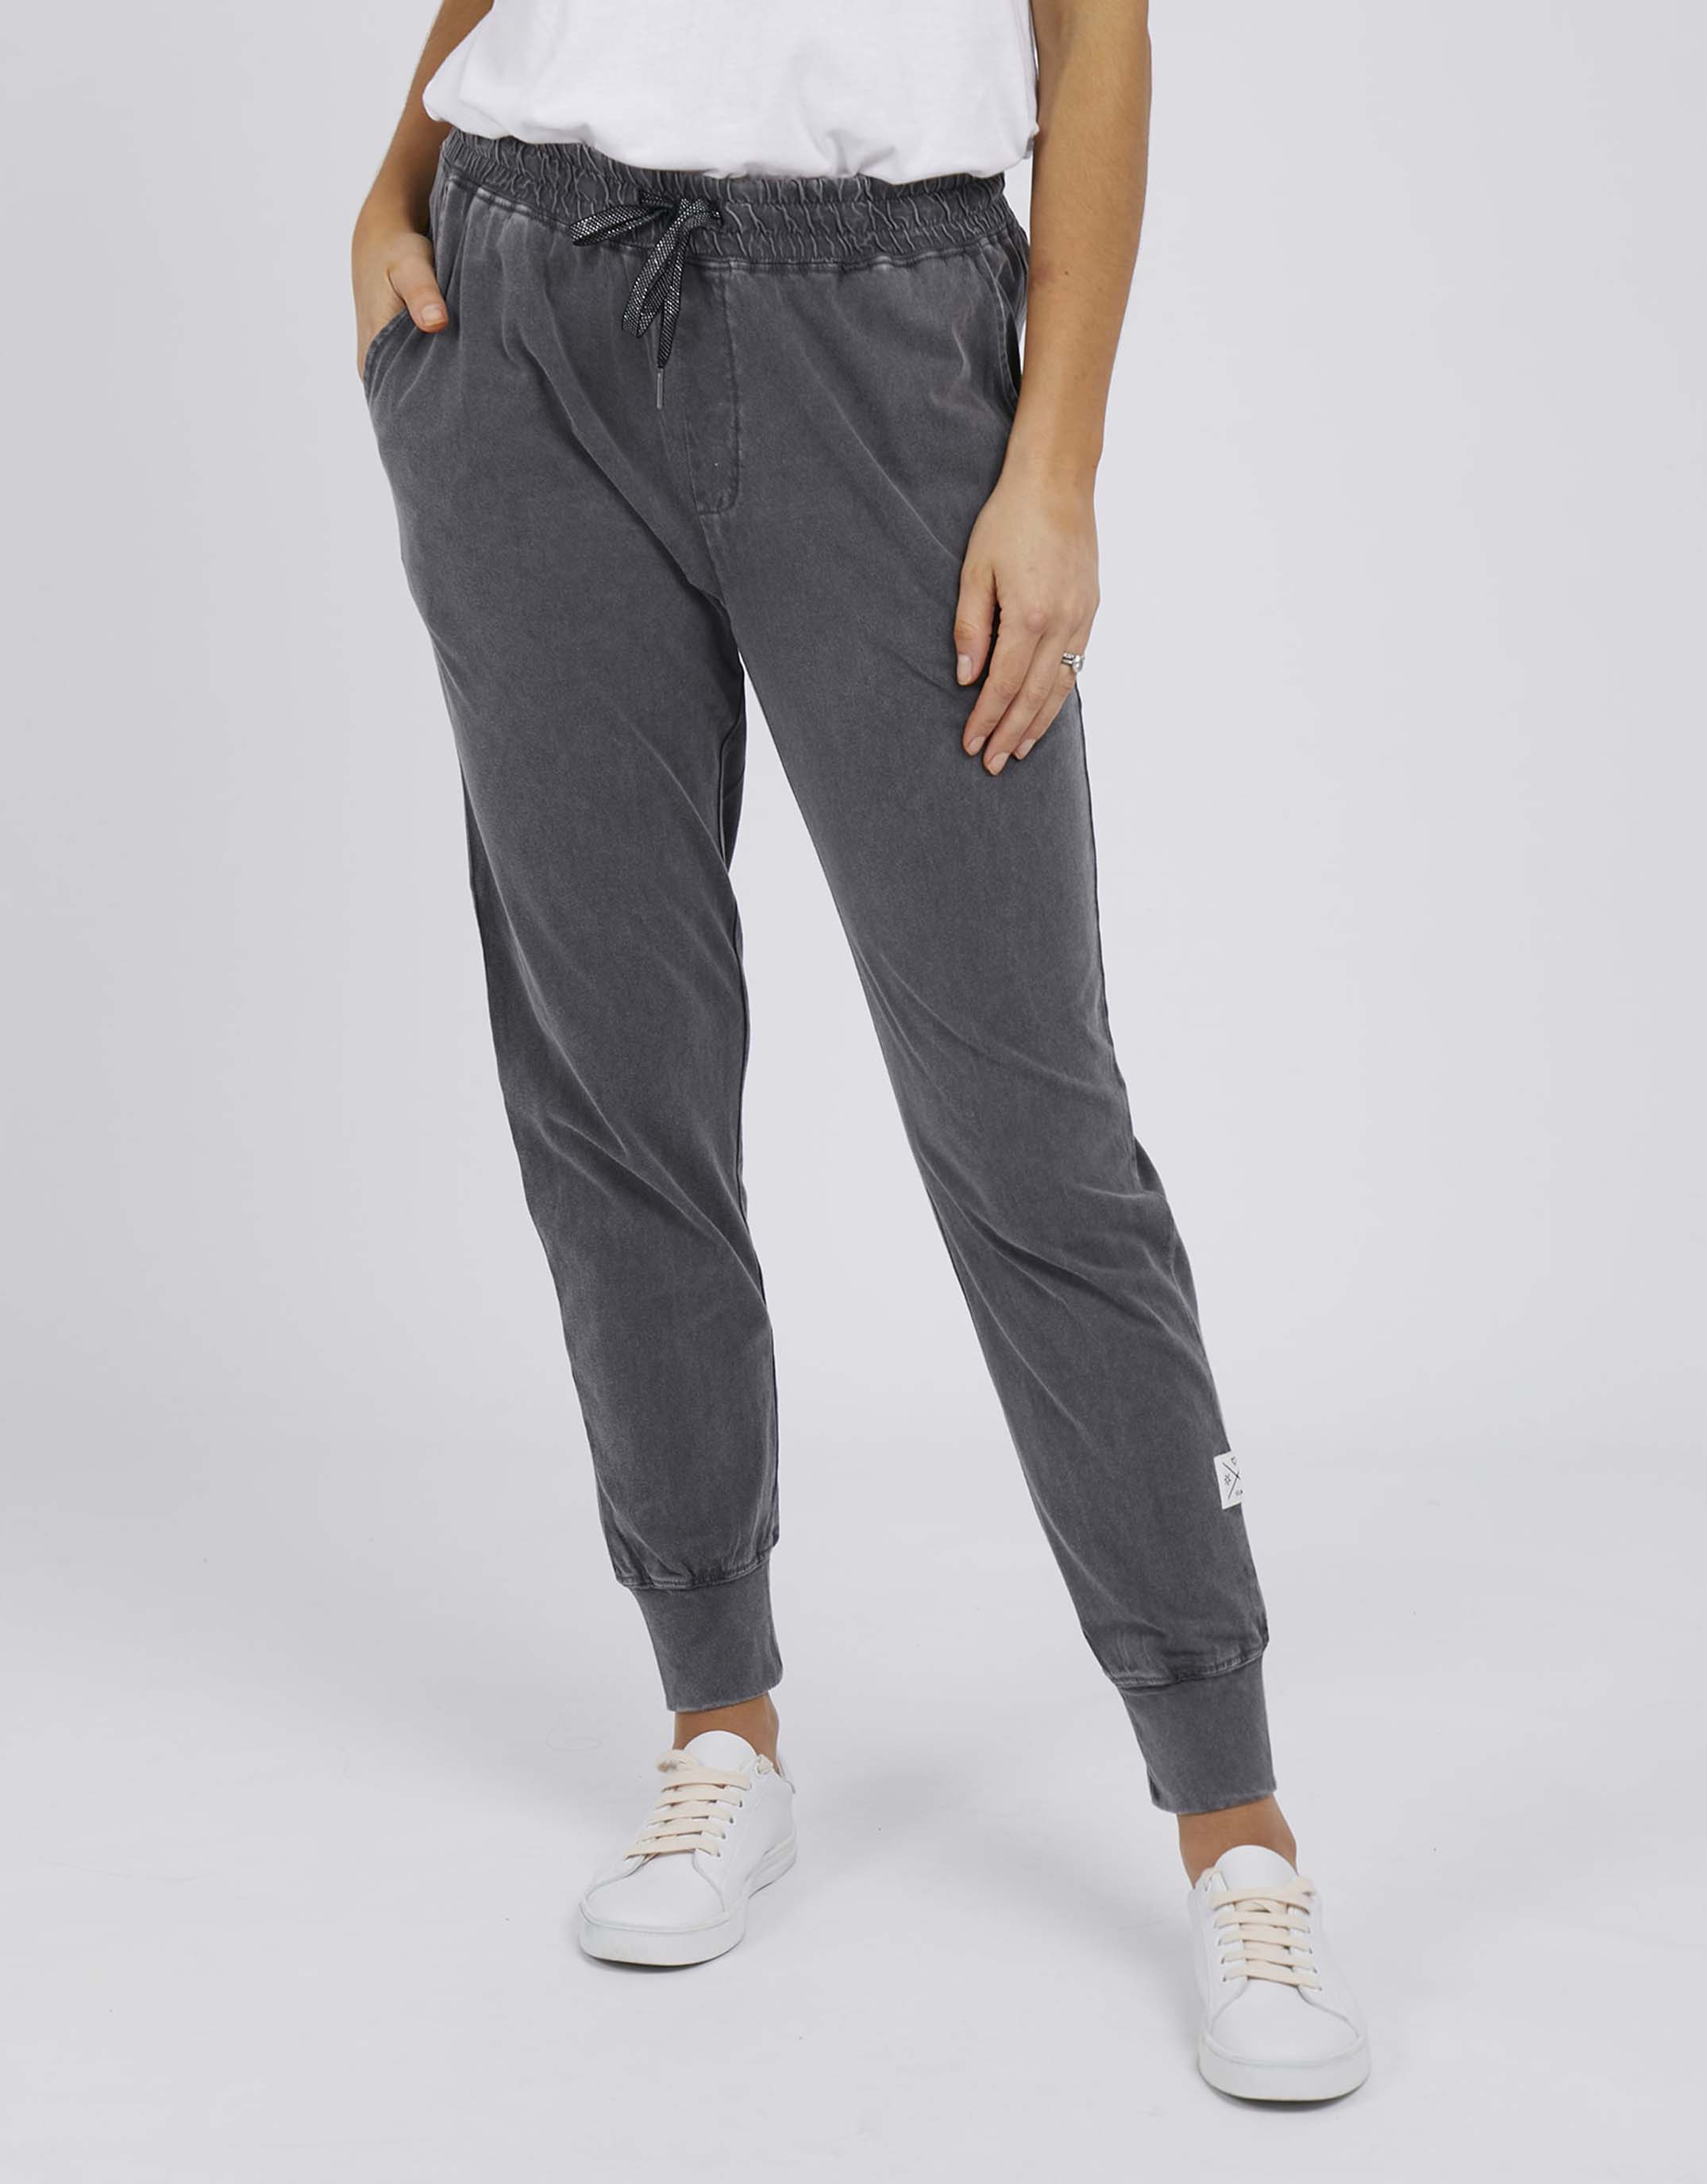 elm-cloud-wash-out-pant-charcoal-womens-clothing